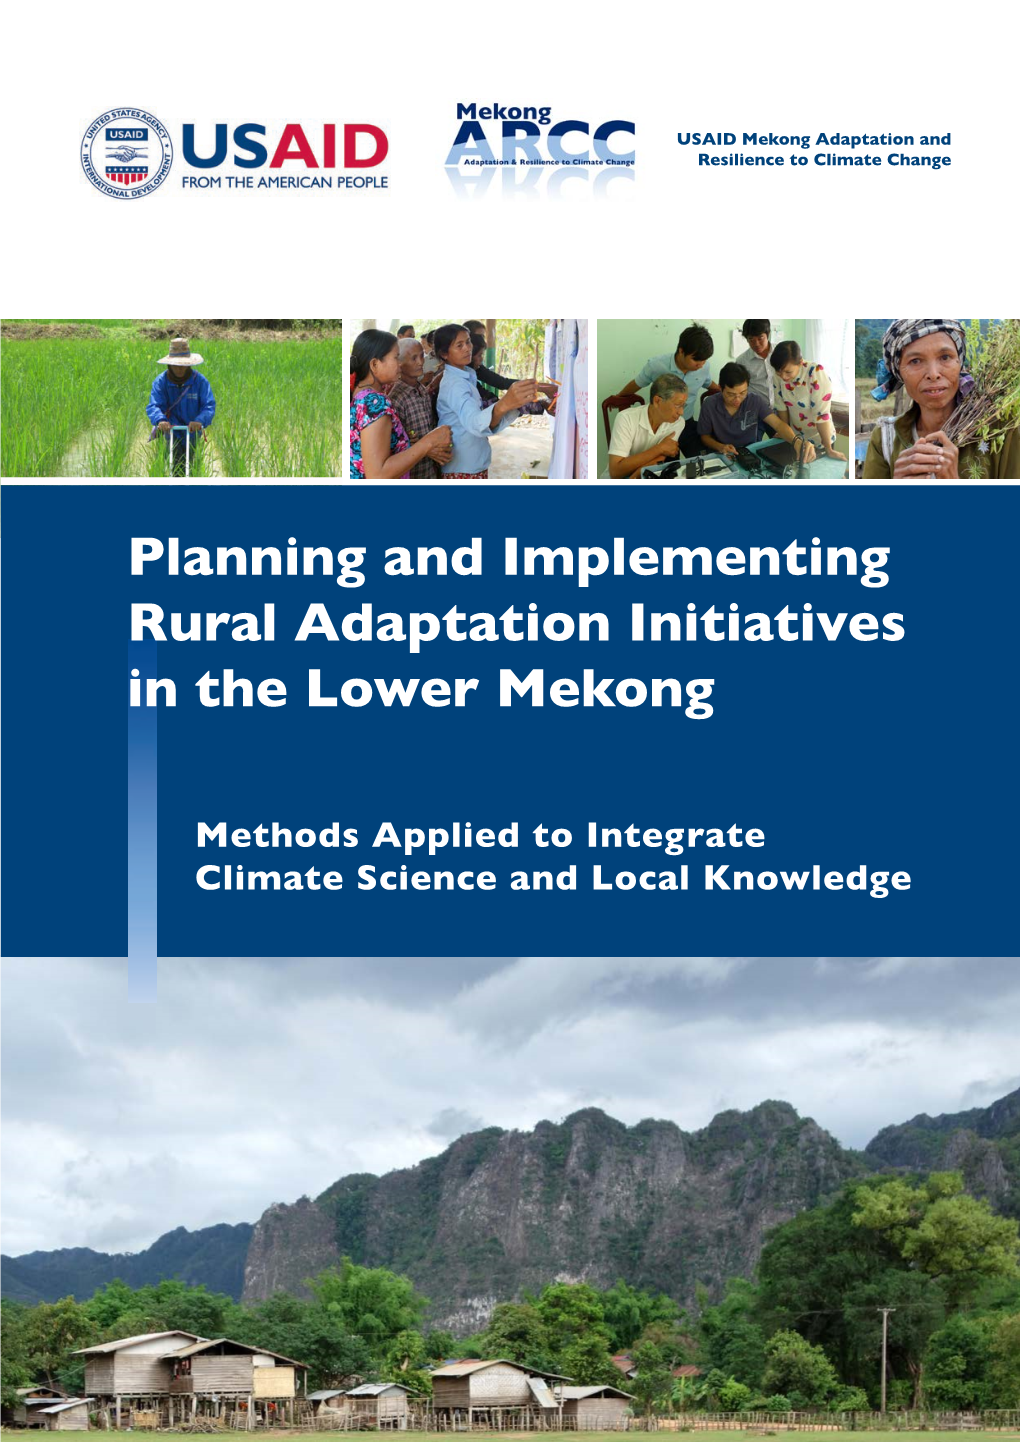 Planning and Implementing Rural Adaptation Initiatives in the Lower Mekong